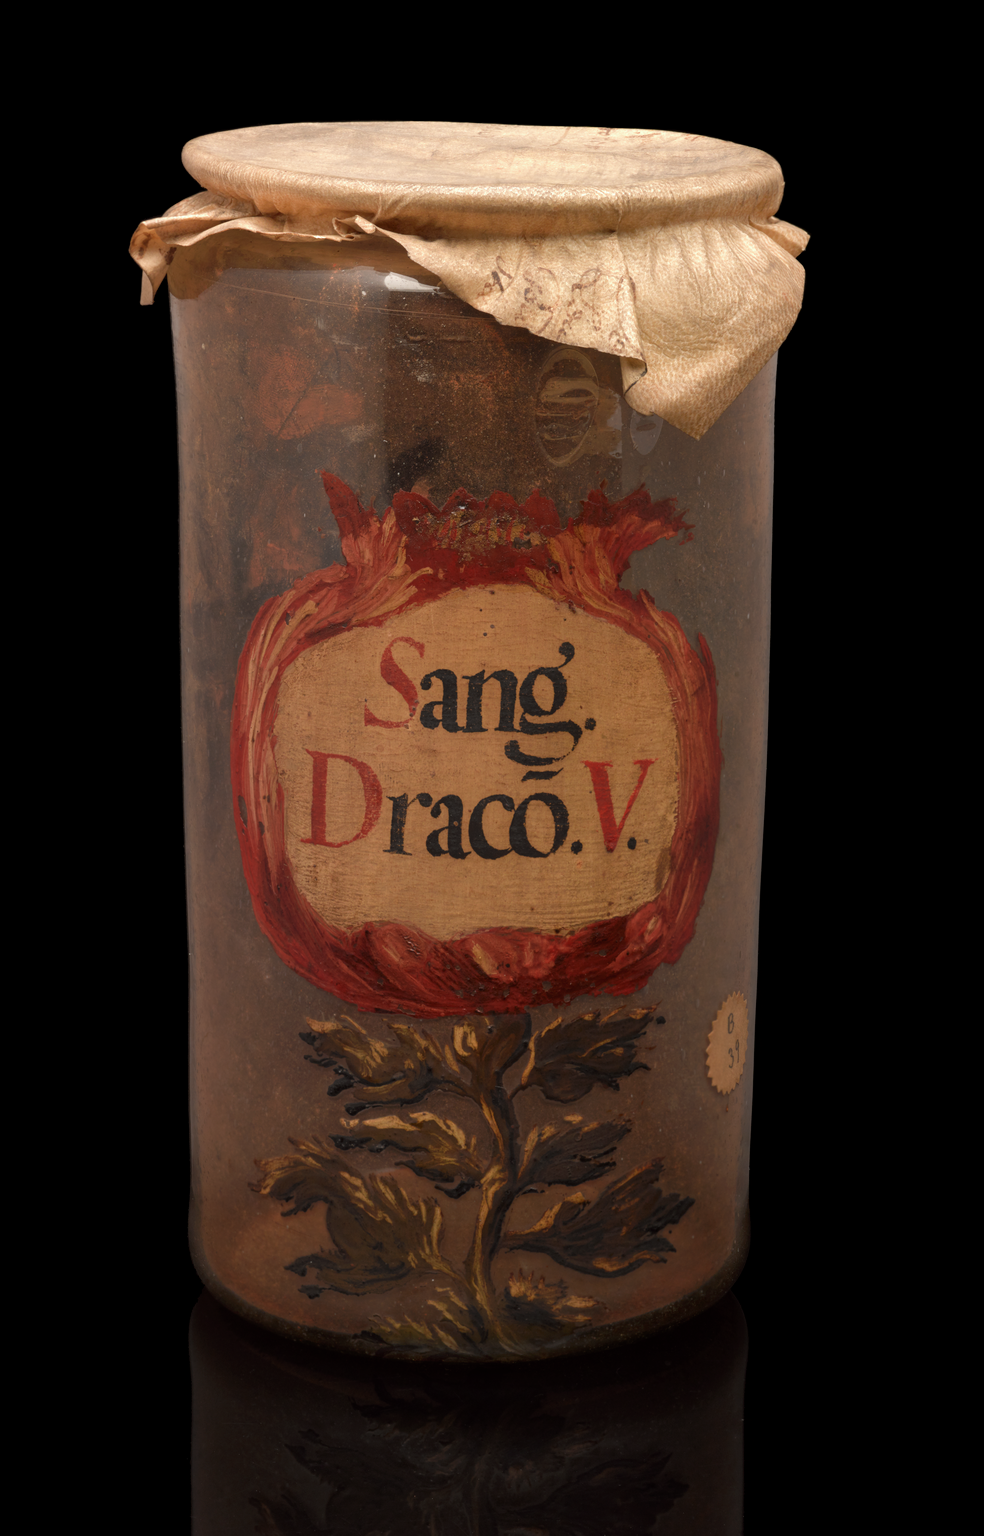 Glass drug jar labelled "Sang Draco.V." (Dragon's blood), probably Spanish, 17th or 18th century